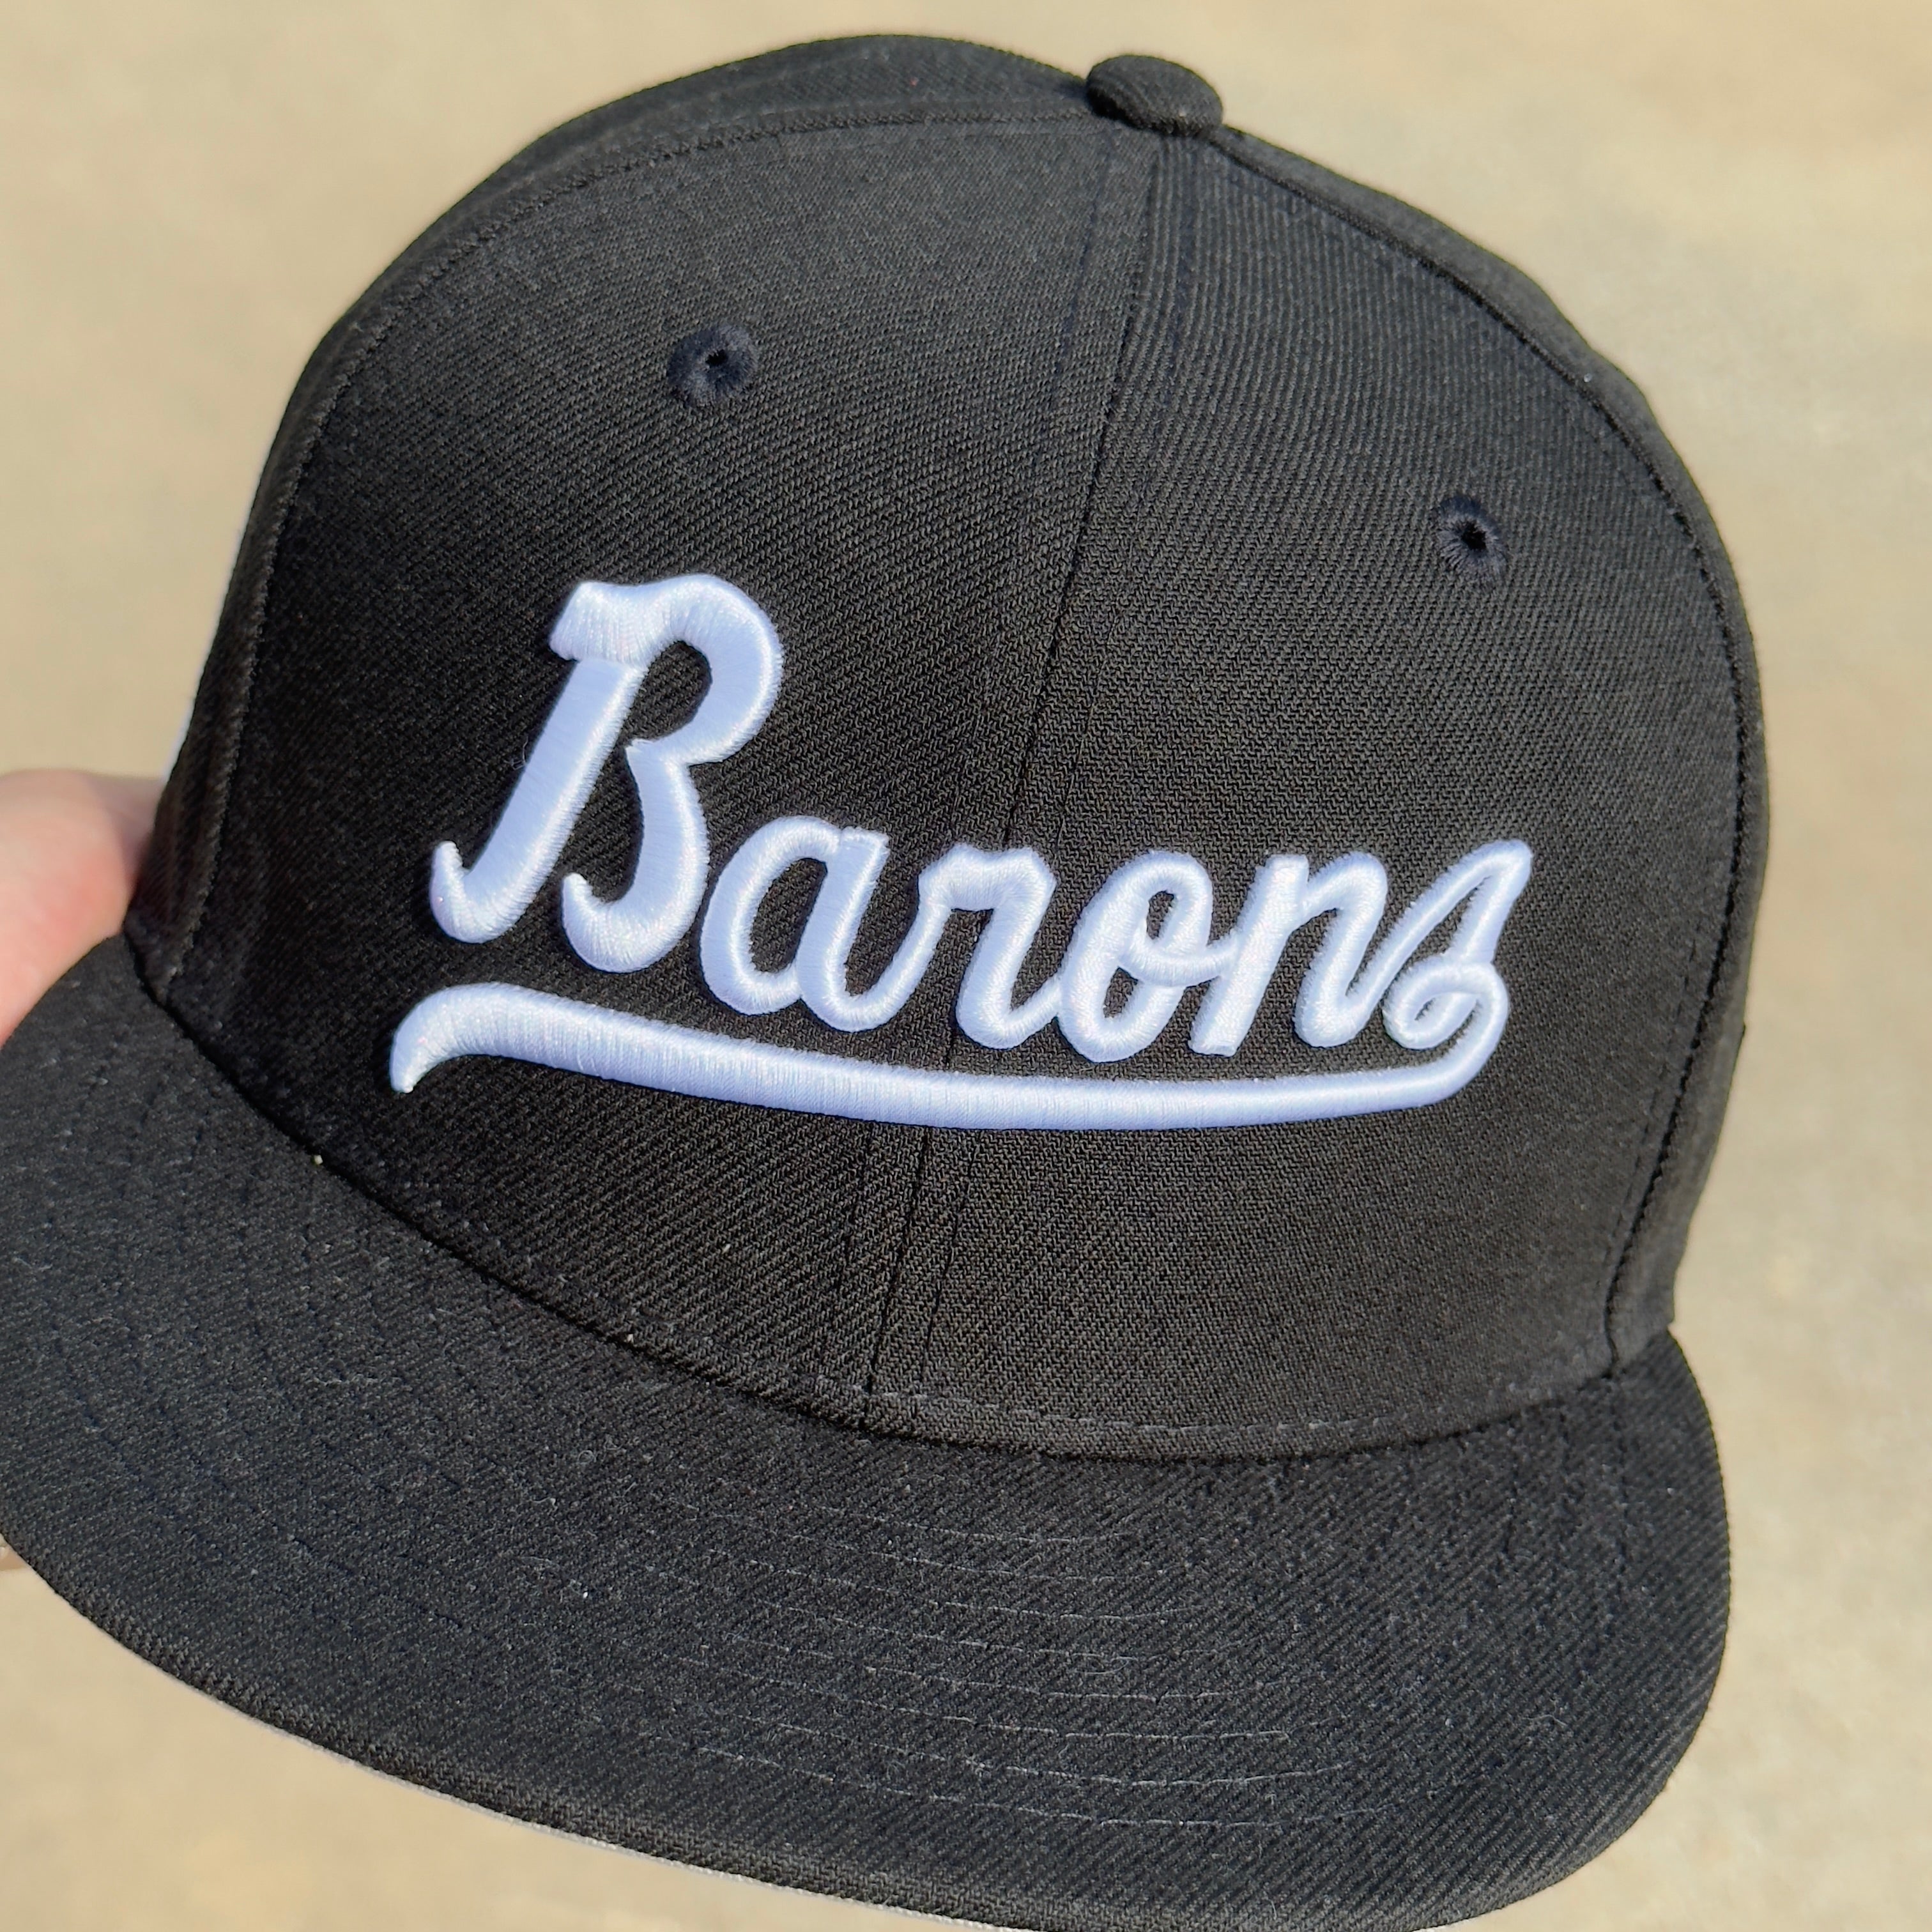 1/8 USED Black Birmingham Barons Chicago White Sox 59fifty New Era Fitted Hat Cap